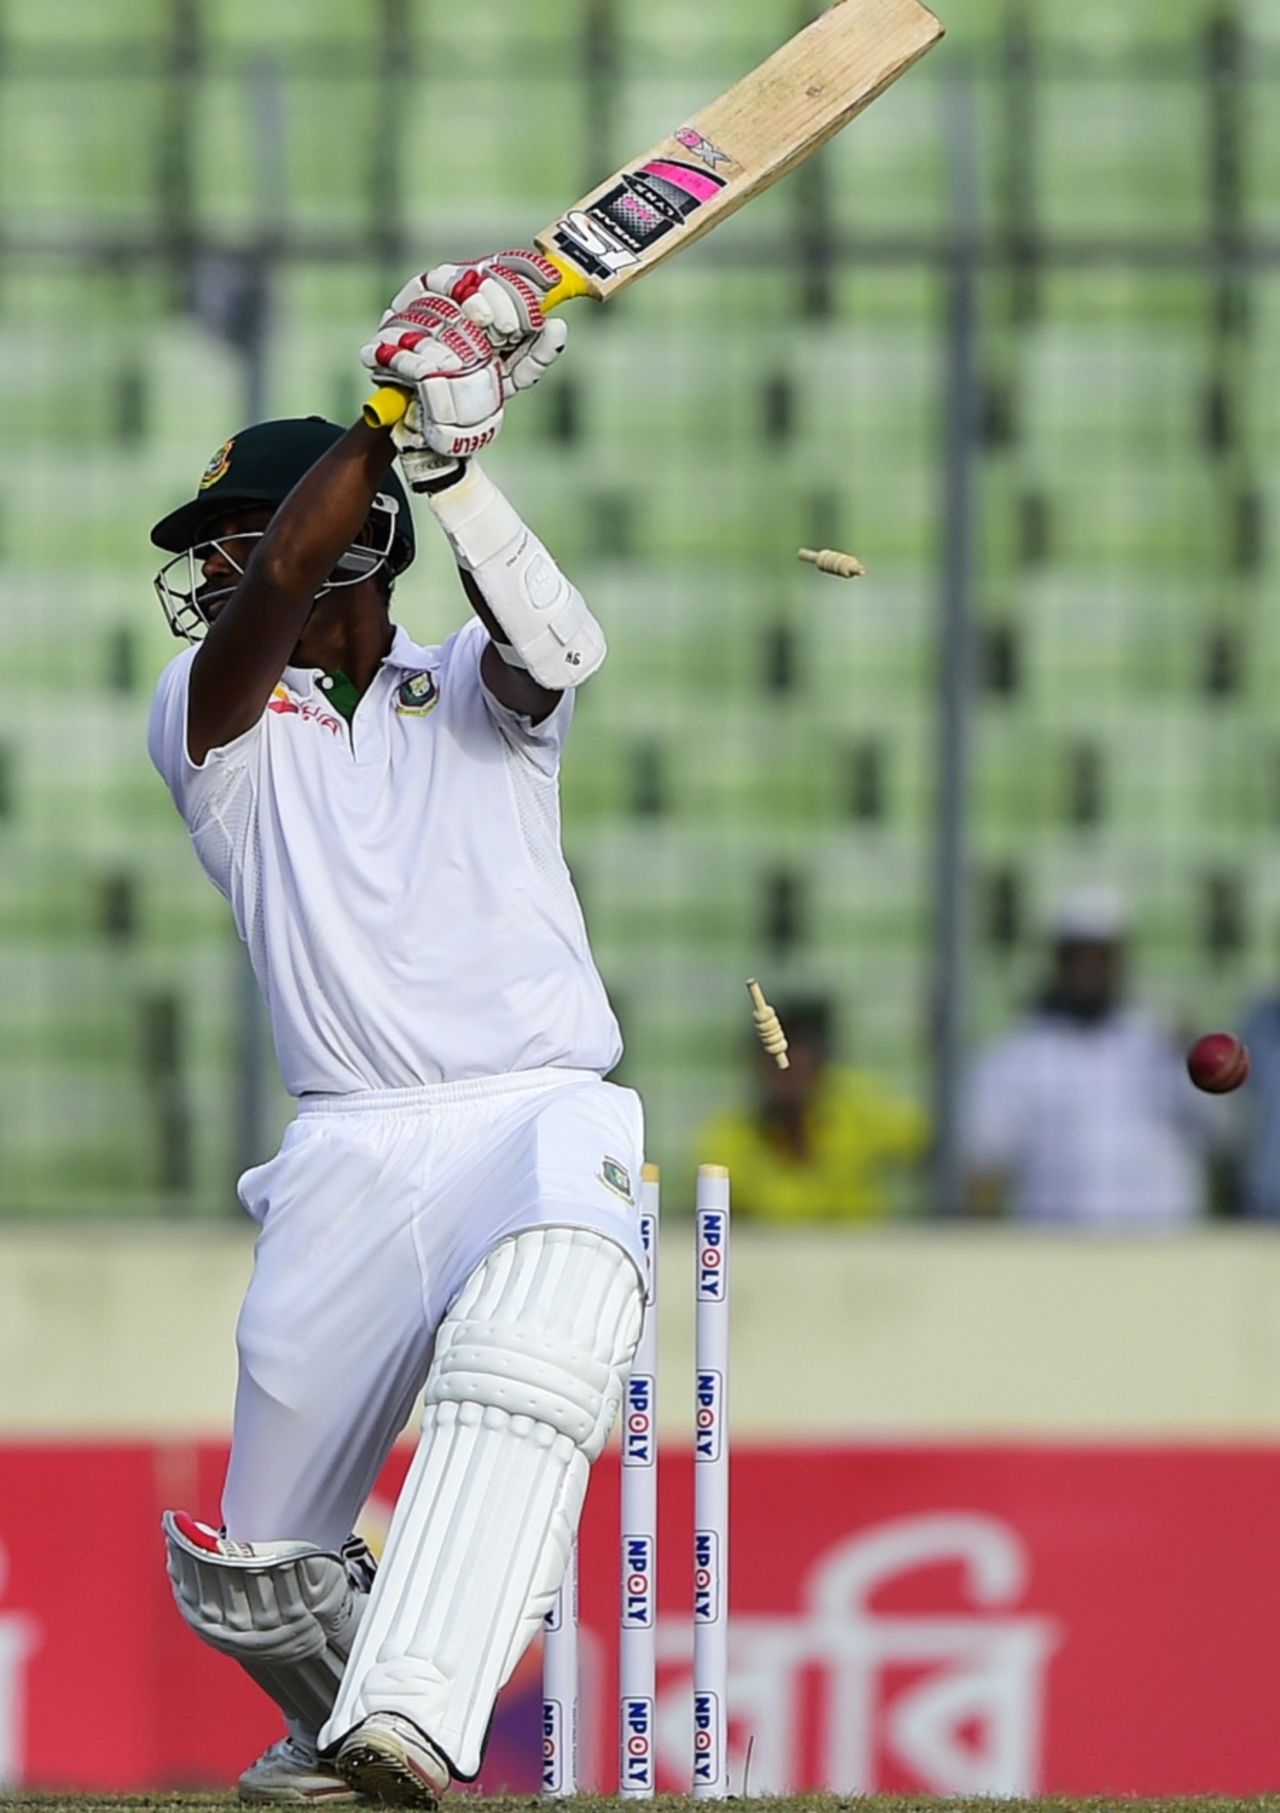 Mohammad Shahid is bowled by Dale Steyn, Bangladesh v South Africa, 2nd Test, Mirpur, 1st day, July 30, 2015